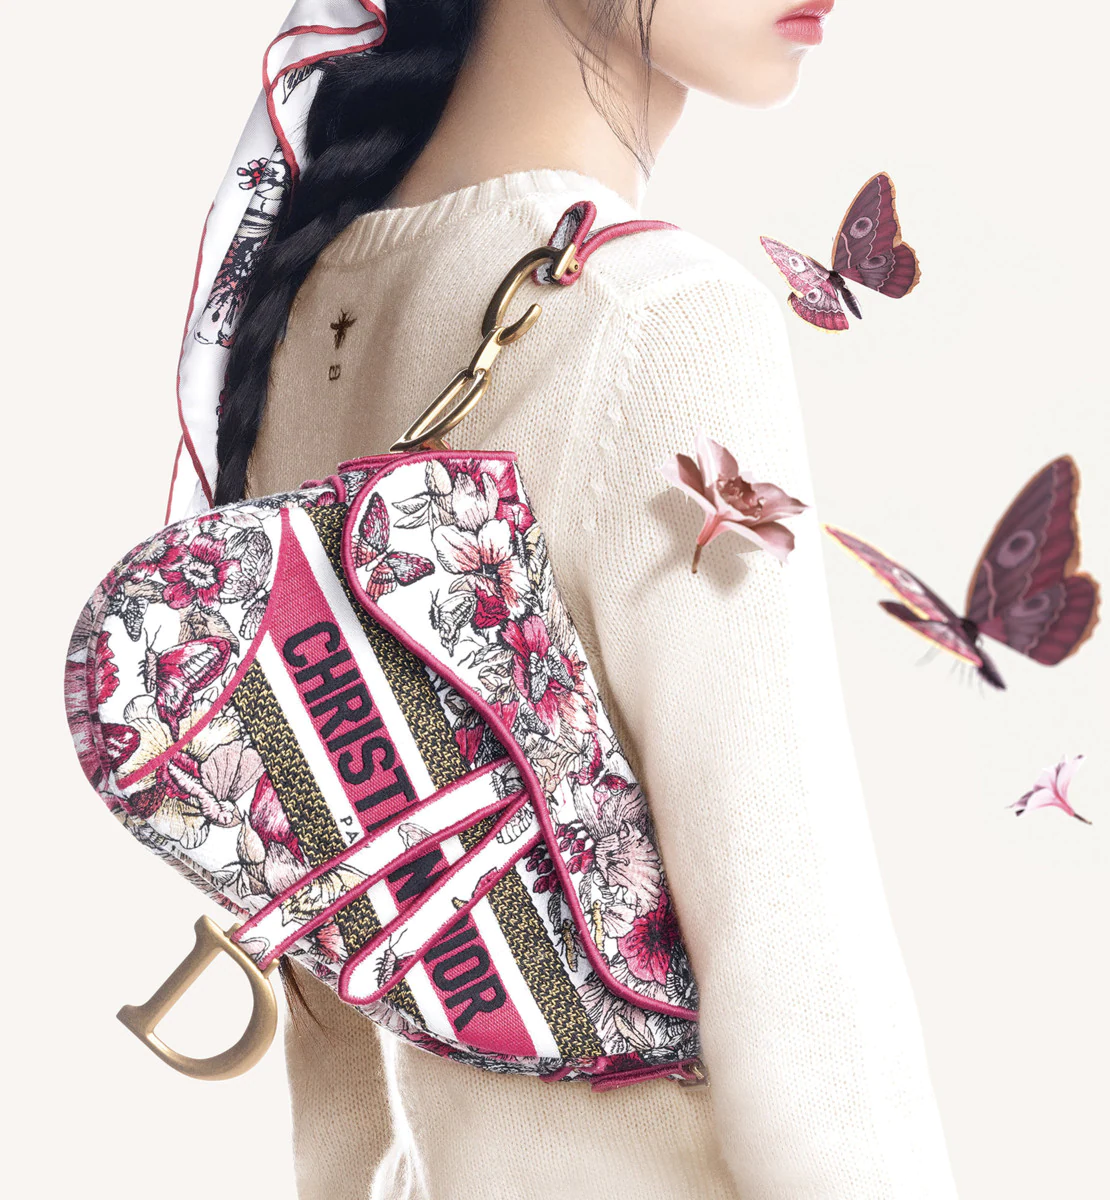 Dior Celebrates the Lunar New Year with a Starry Theme  DIOR